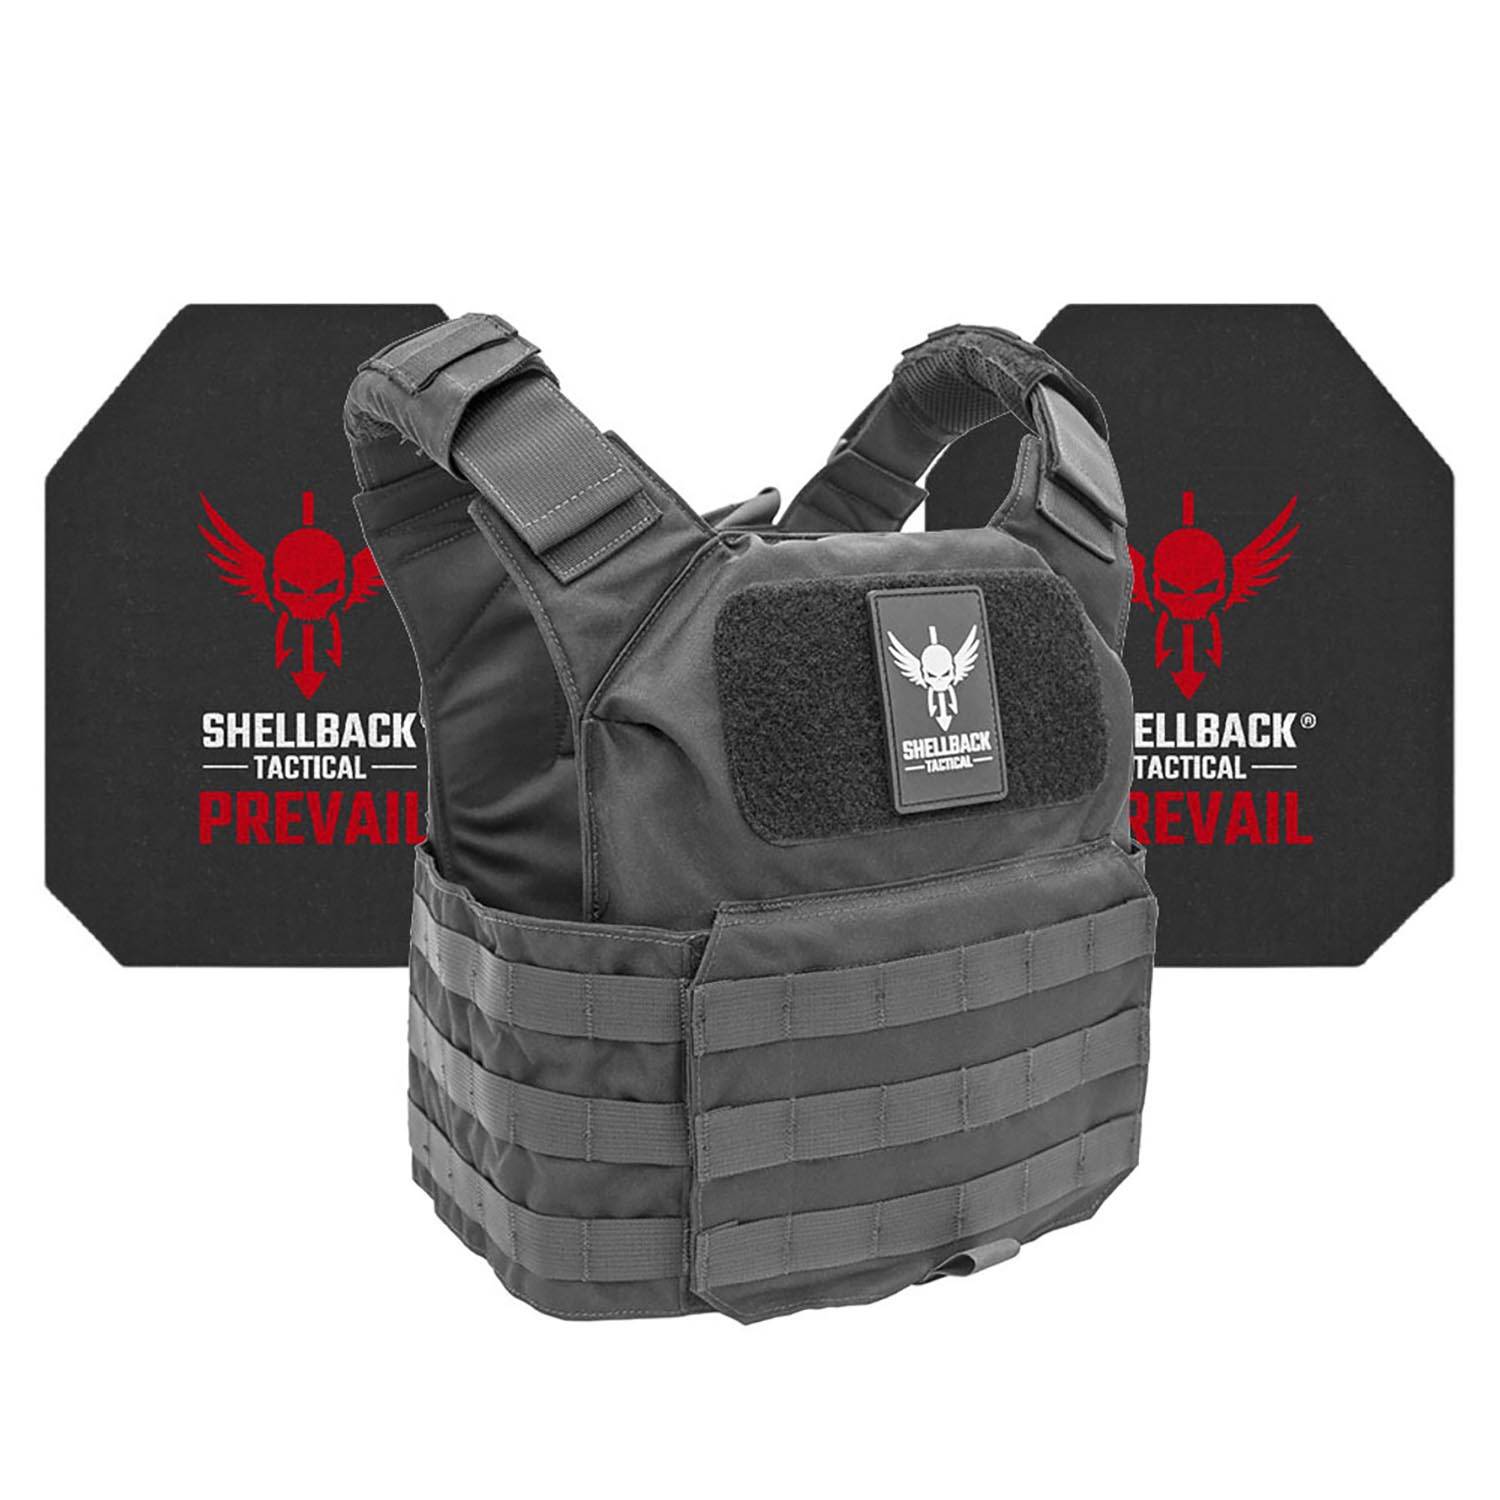 SHELLBACK TACTICAL PATRIOT ACTIVE SHOOTER KIT WITH LEVEL IV